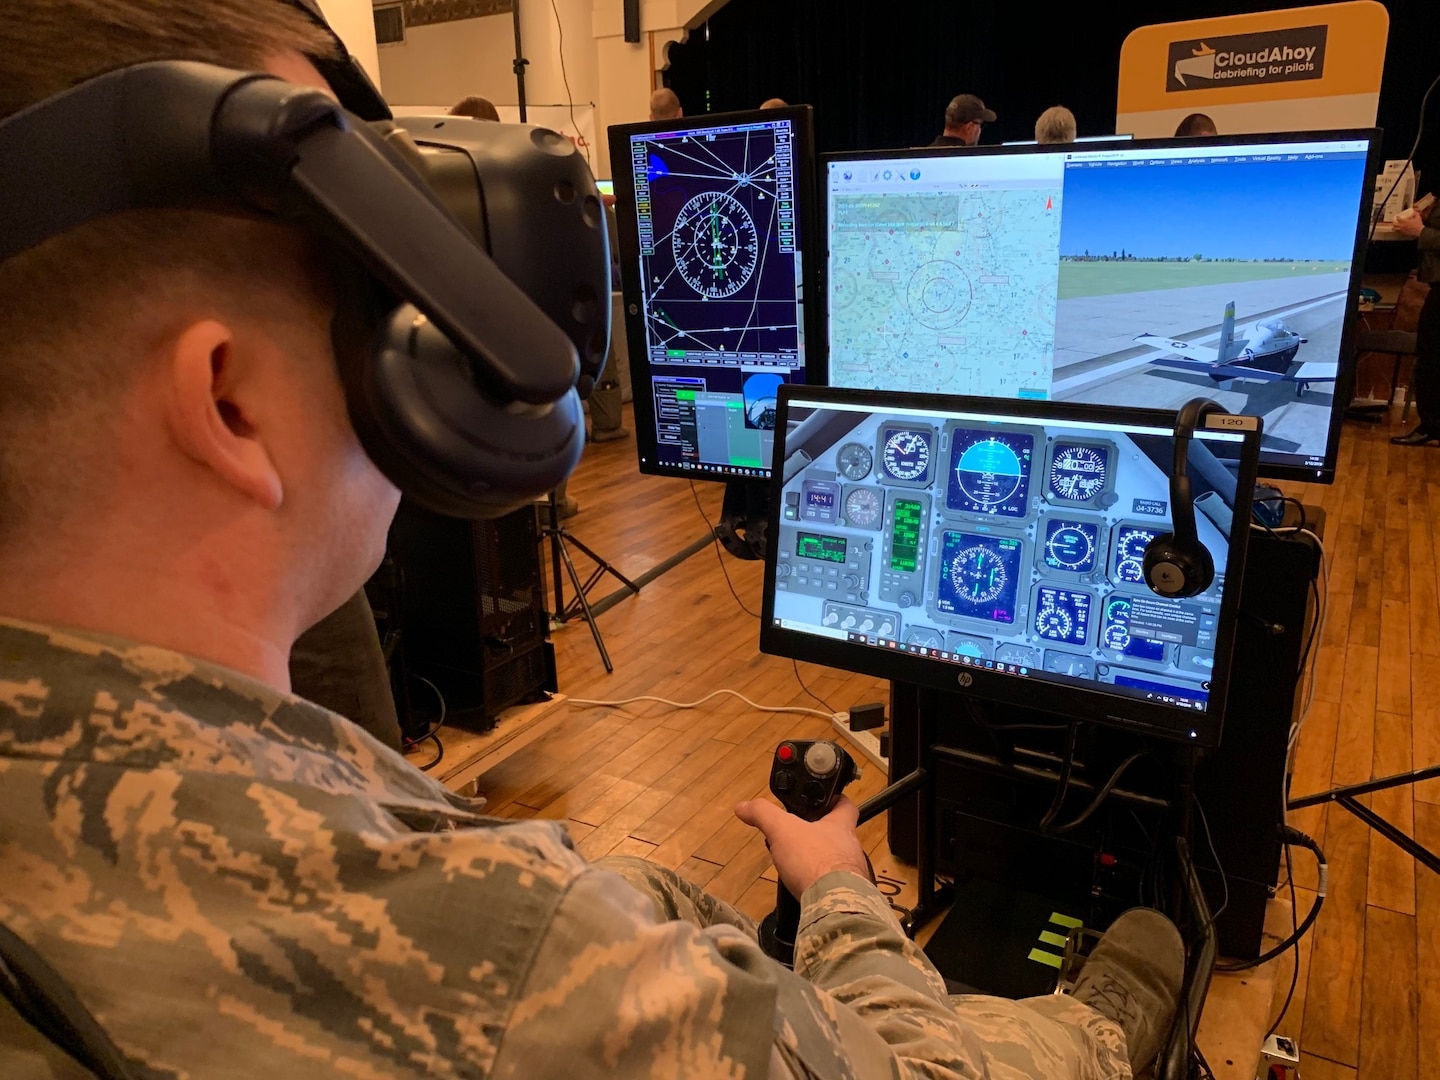 Staff Sgt. Joseph Sabin, Air Education and Training Command Technology Integrated Detachment, flies a virtual-reality sortie at the Pilot Training Next Technology Expo at Joint Base San Antonio-Randolph March 12. Technology currently being used at PTN was on display at the expo and subject matter experts and technology vendors were available to talk with attendees.